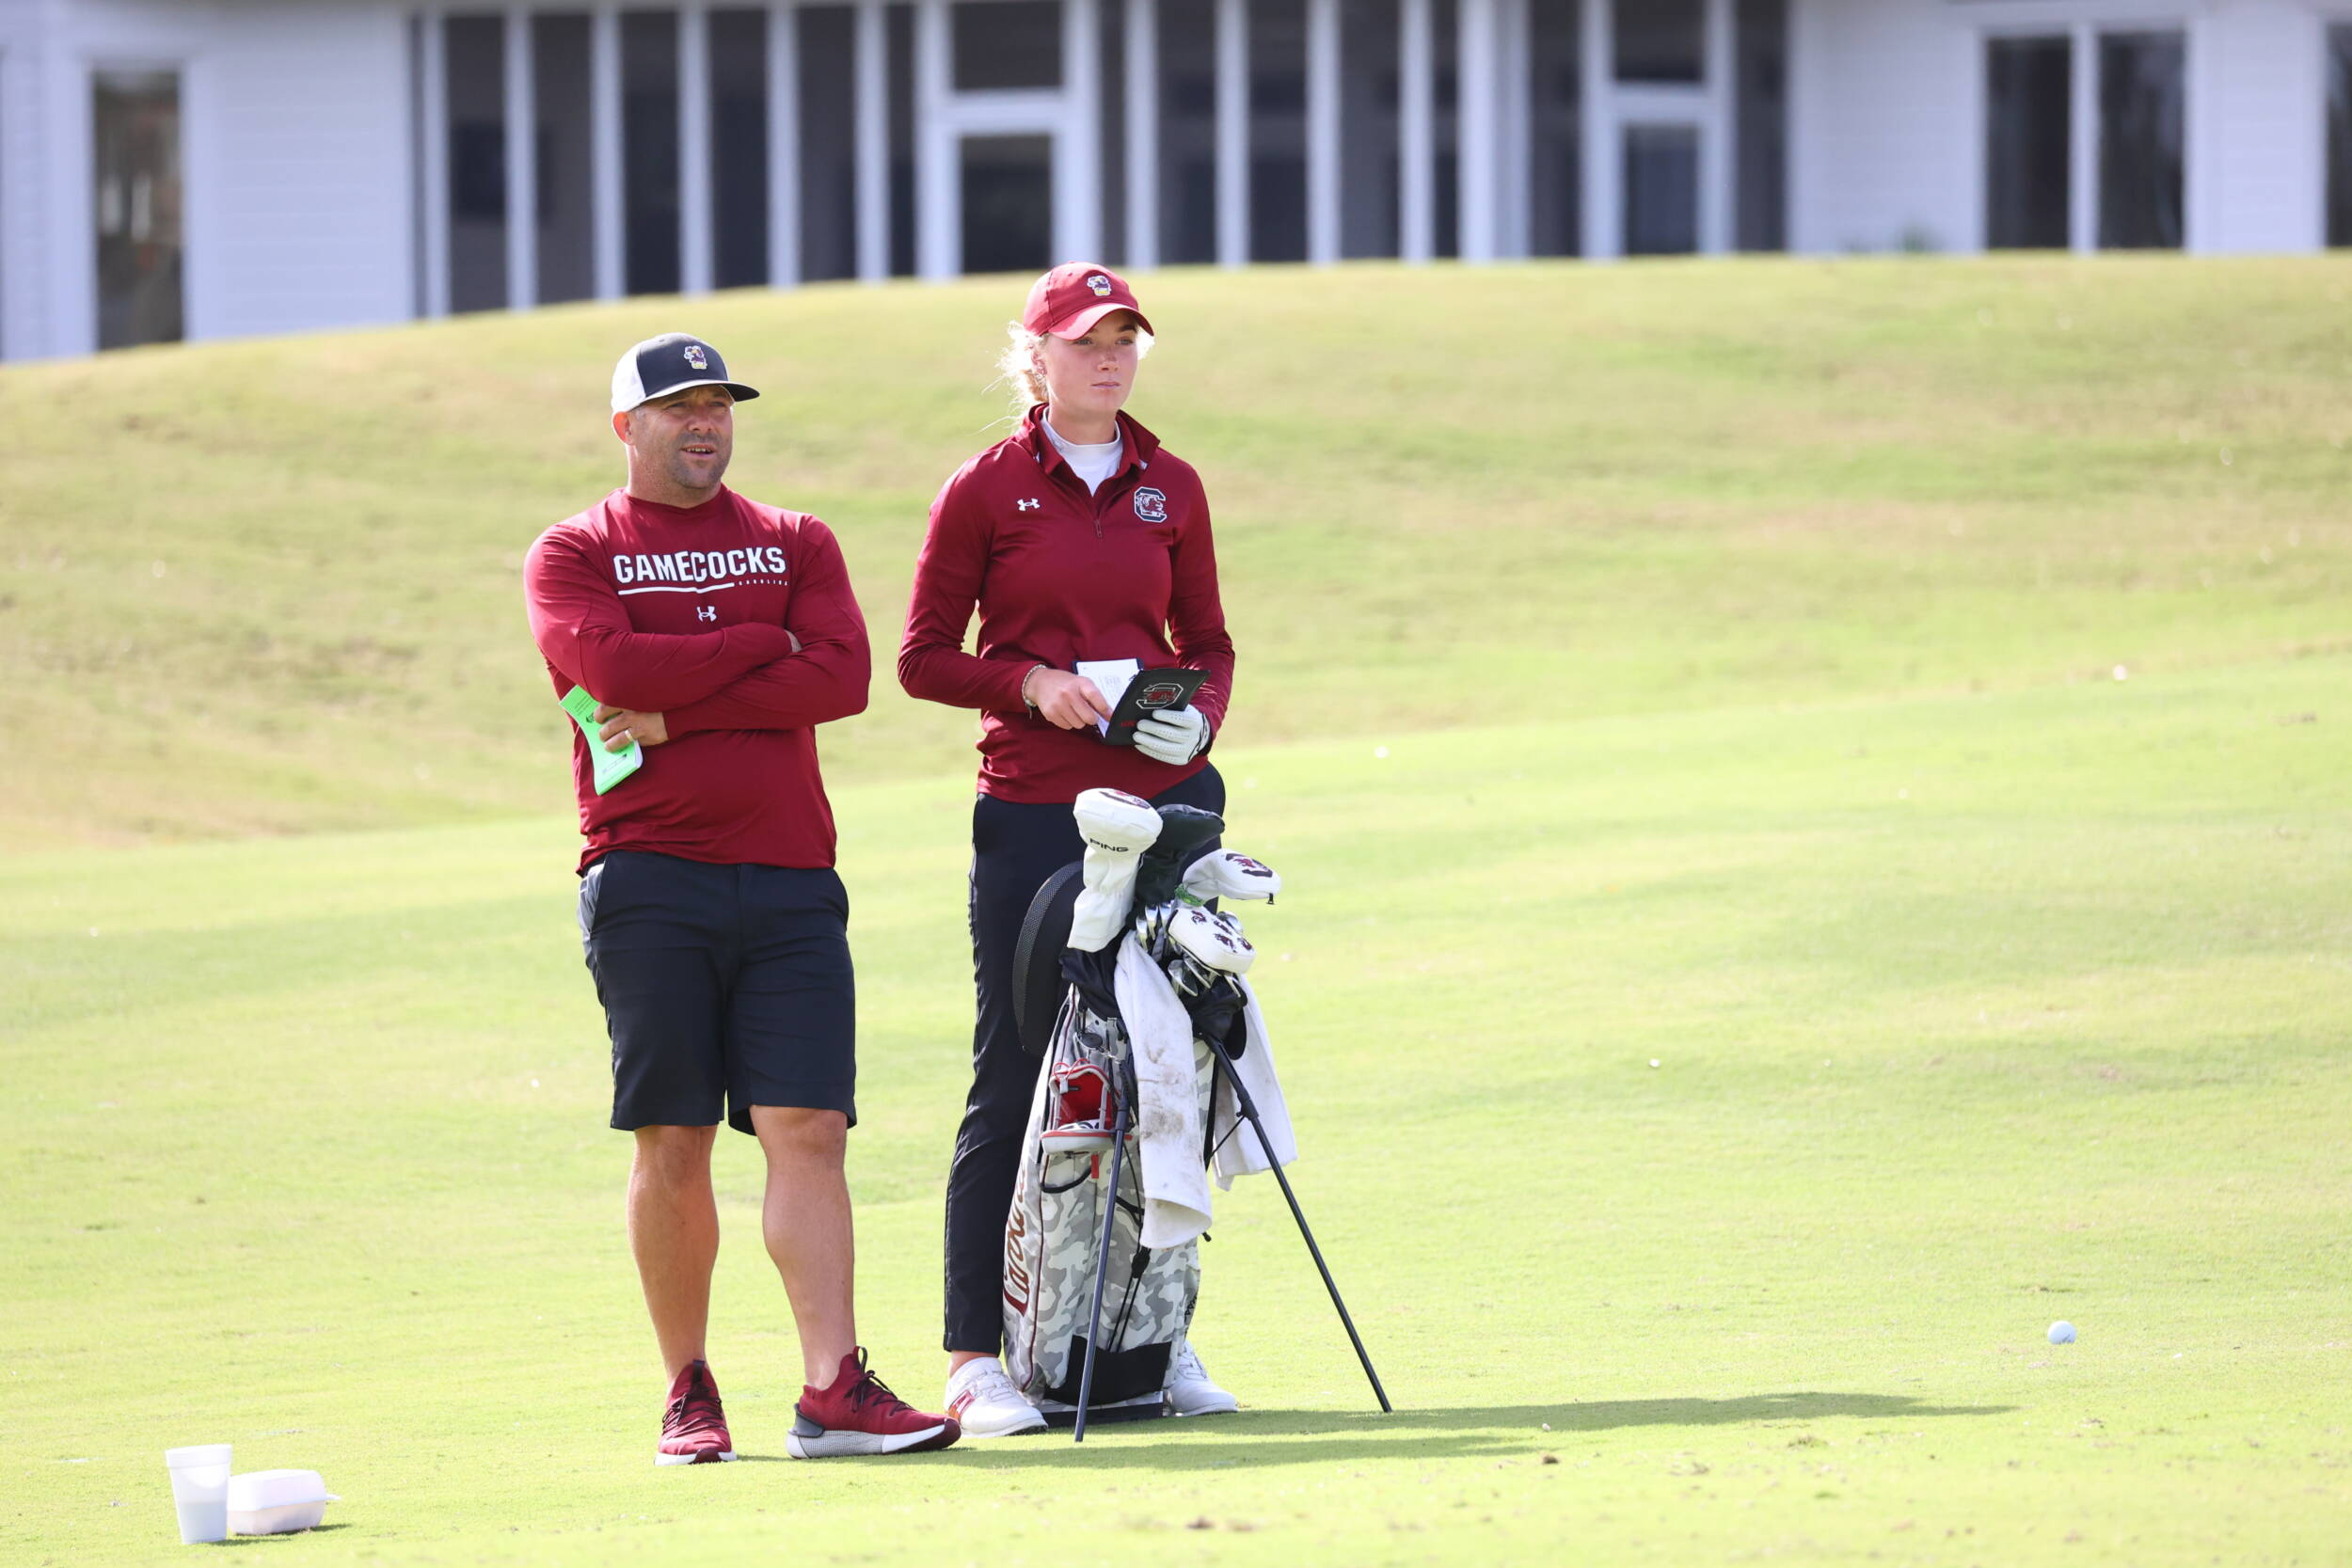 No. 4 Gamecocks Eighth in Bahamas after 18 holes